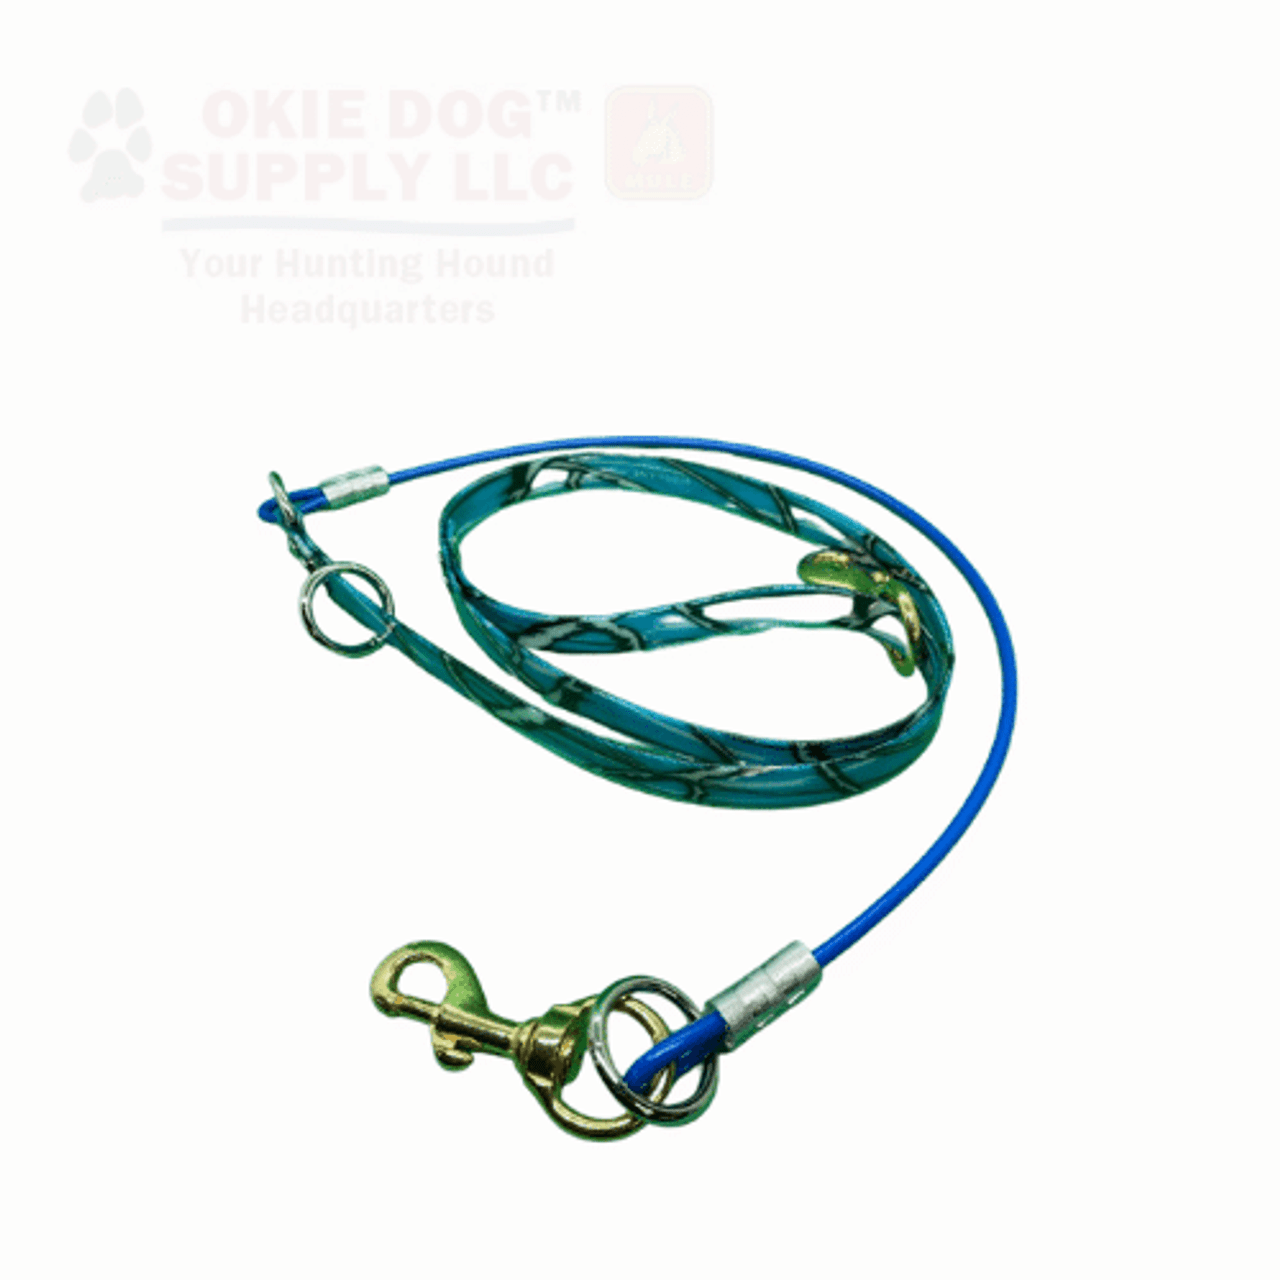 dayglo camo lead with cable end on dog side in camo blue